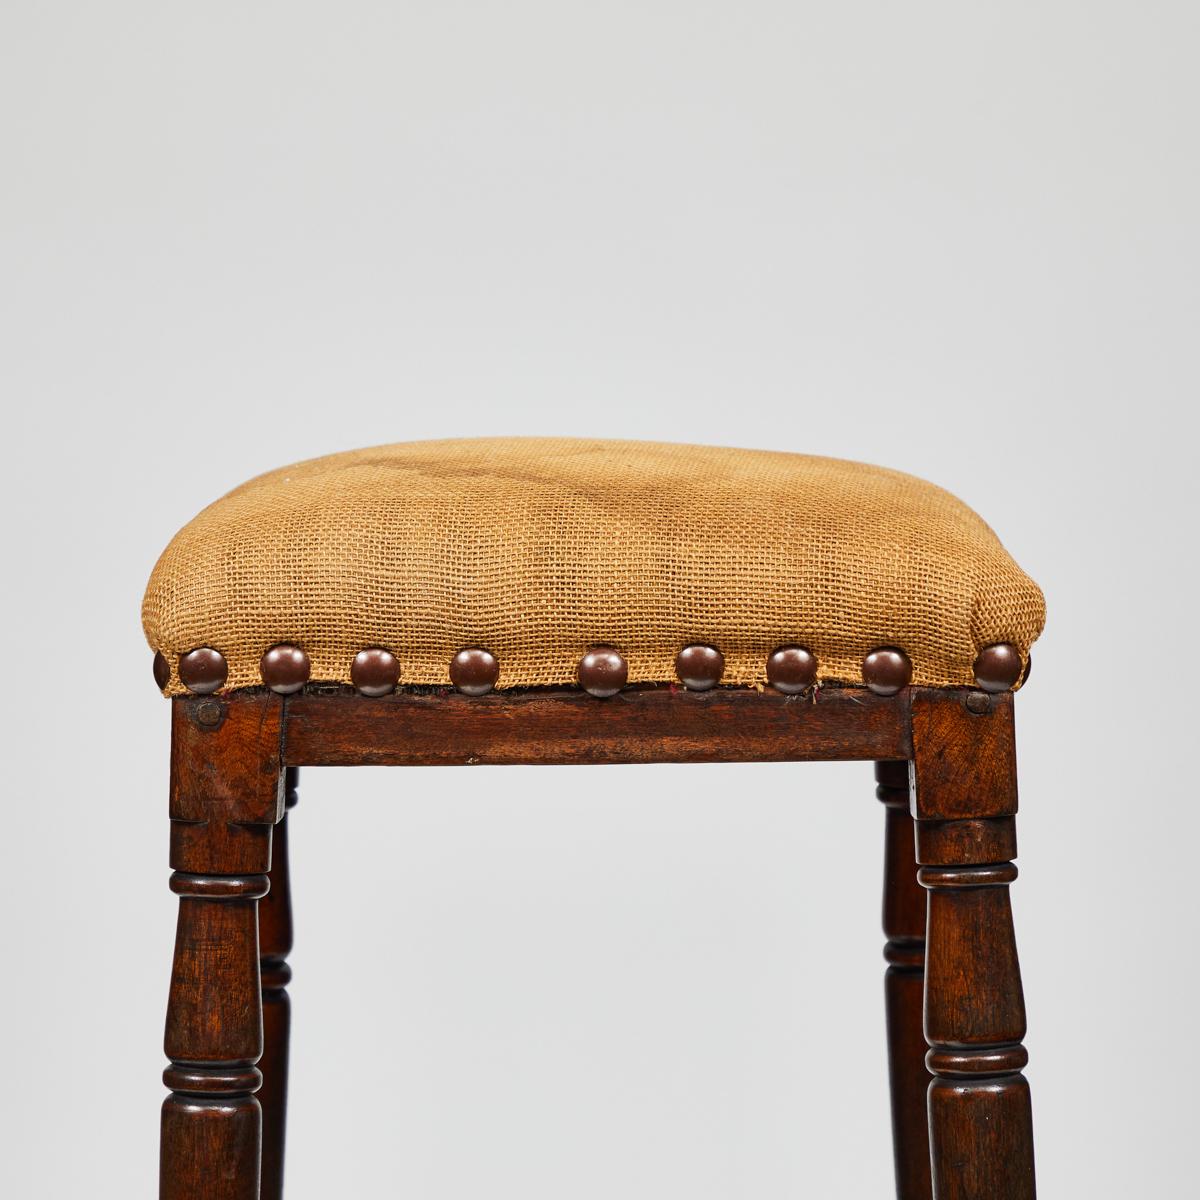 Upholstery Late 19th Century Tall Upholstered English Stool with Bottom Shelf For Sale